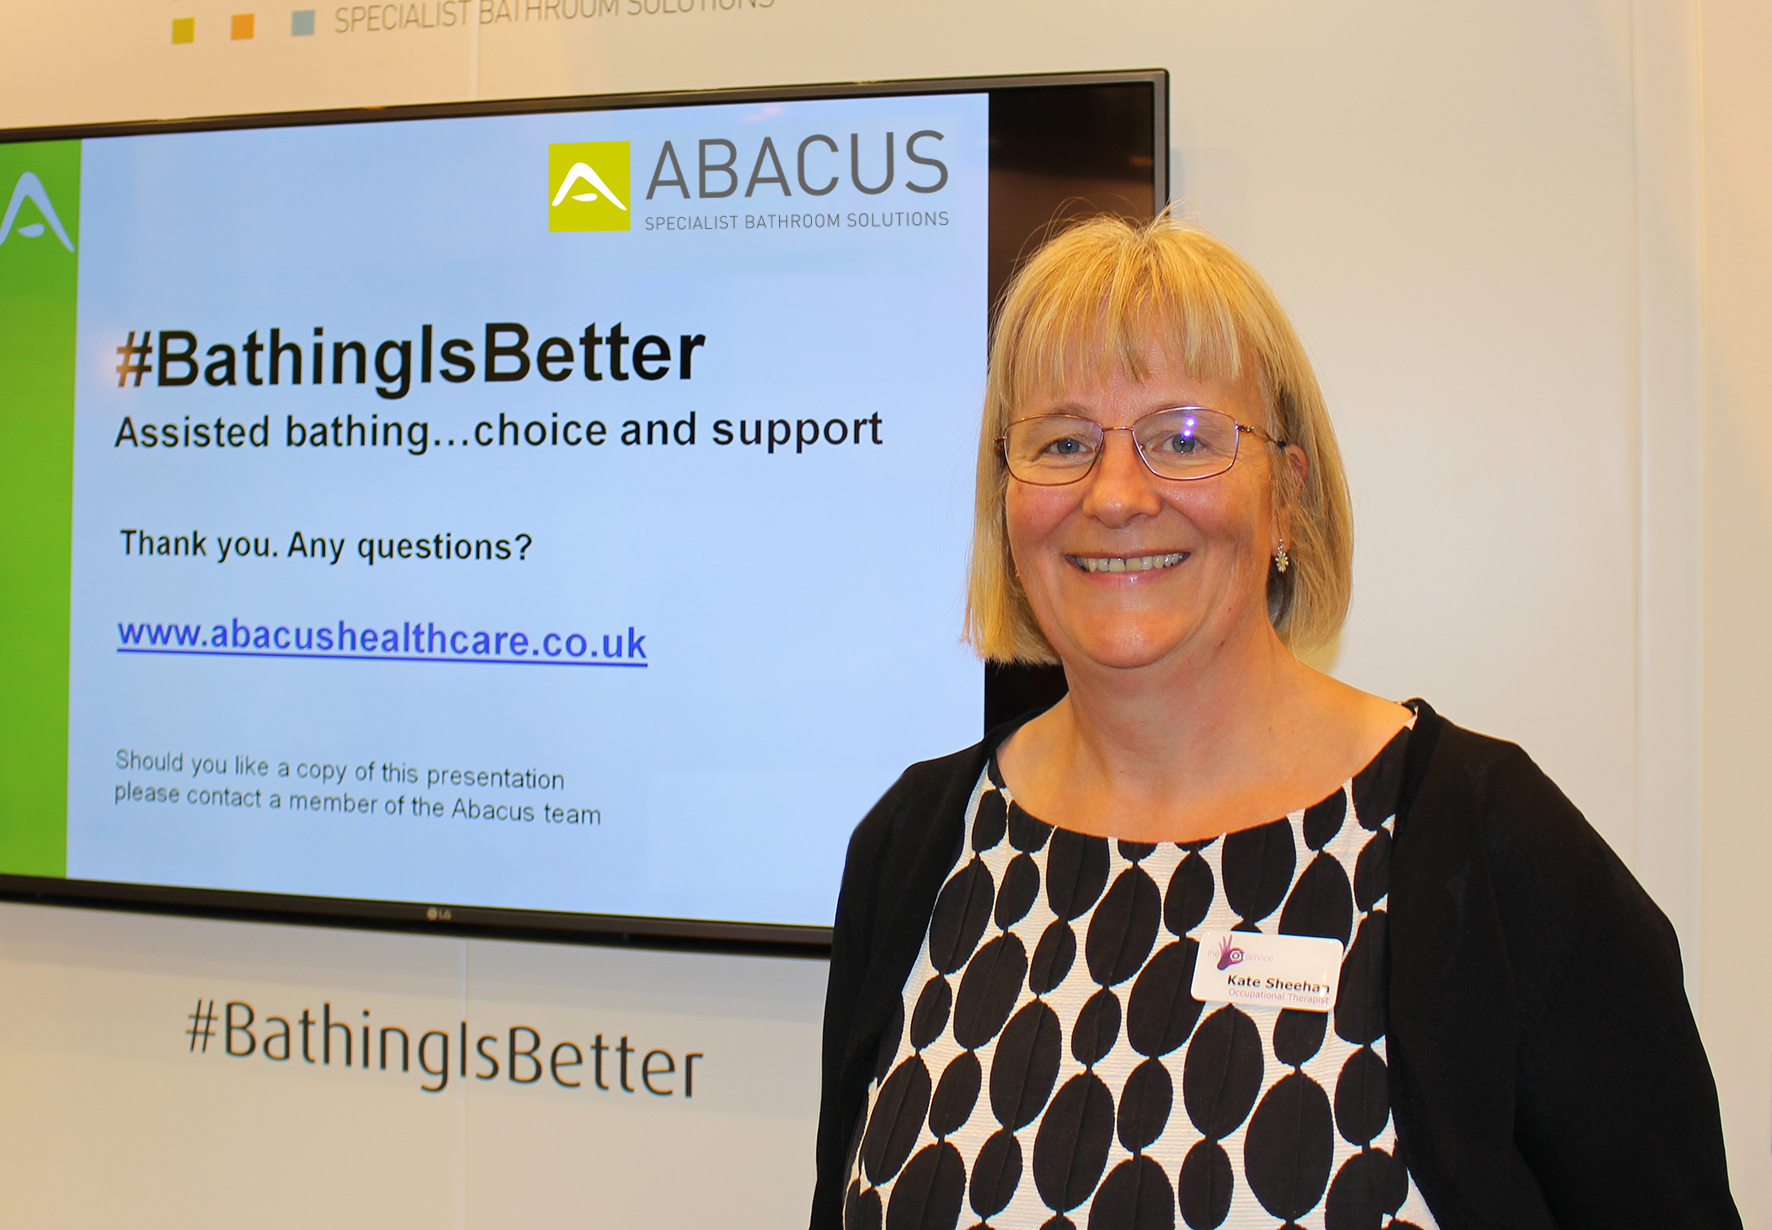 Respected OT Kate Sheehan to present “Bathing - a right to play” seminar with Abacus at Kidz to Adultz North